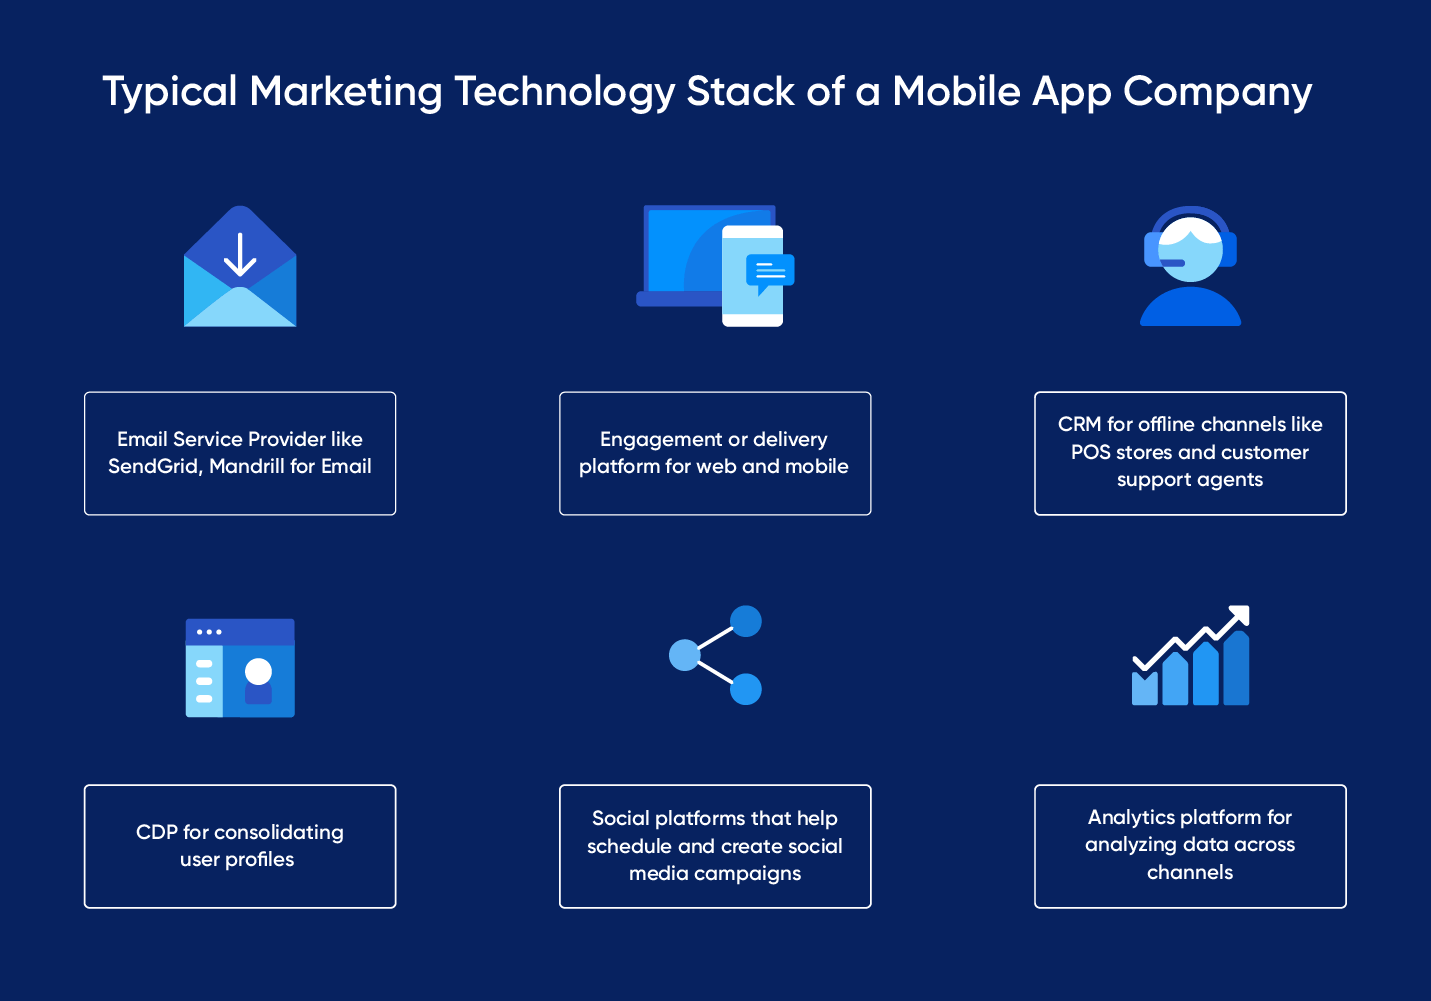 Marketing Technology Stack of a Mobile App Company